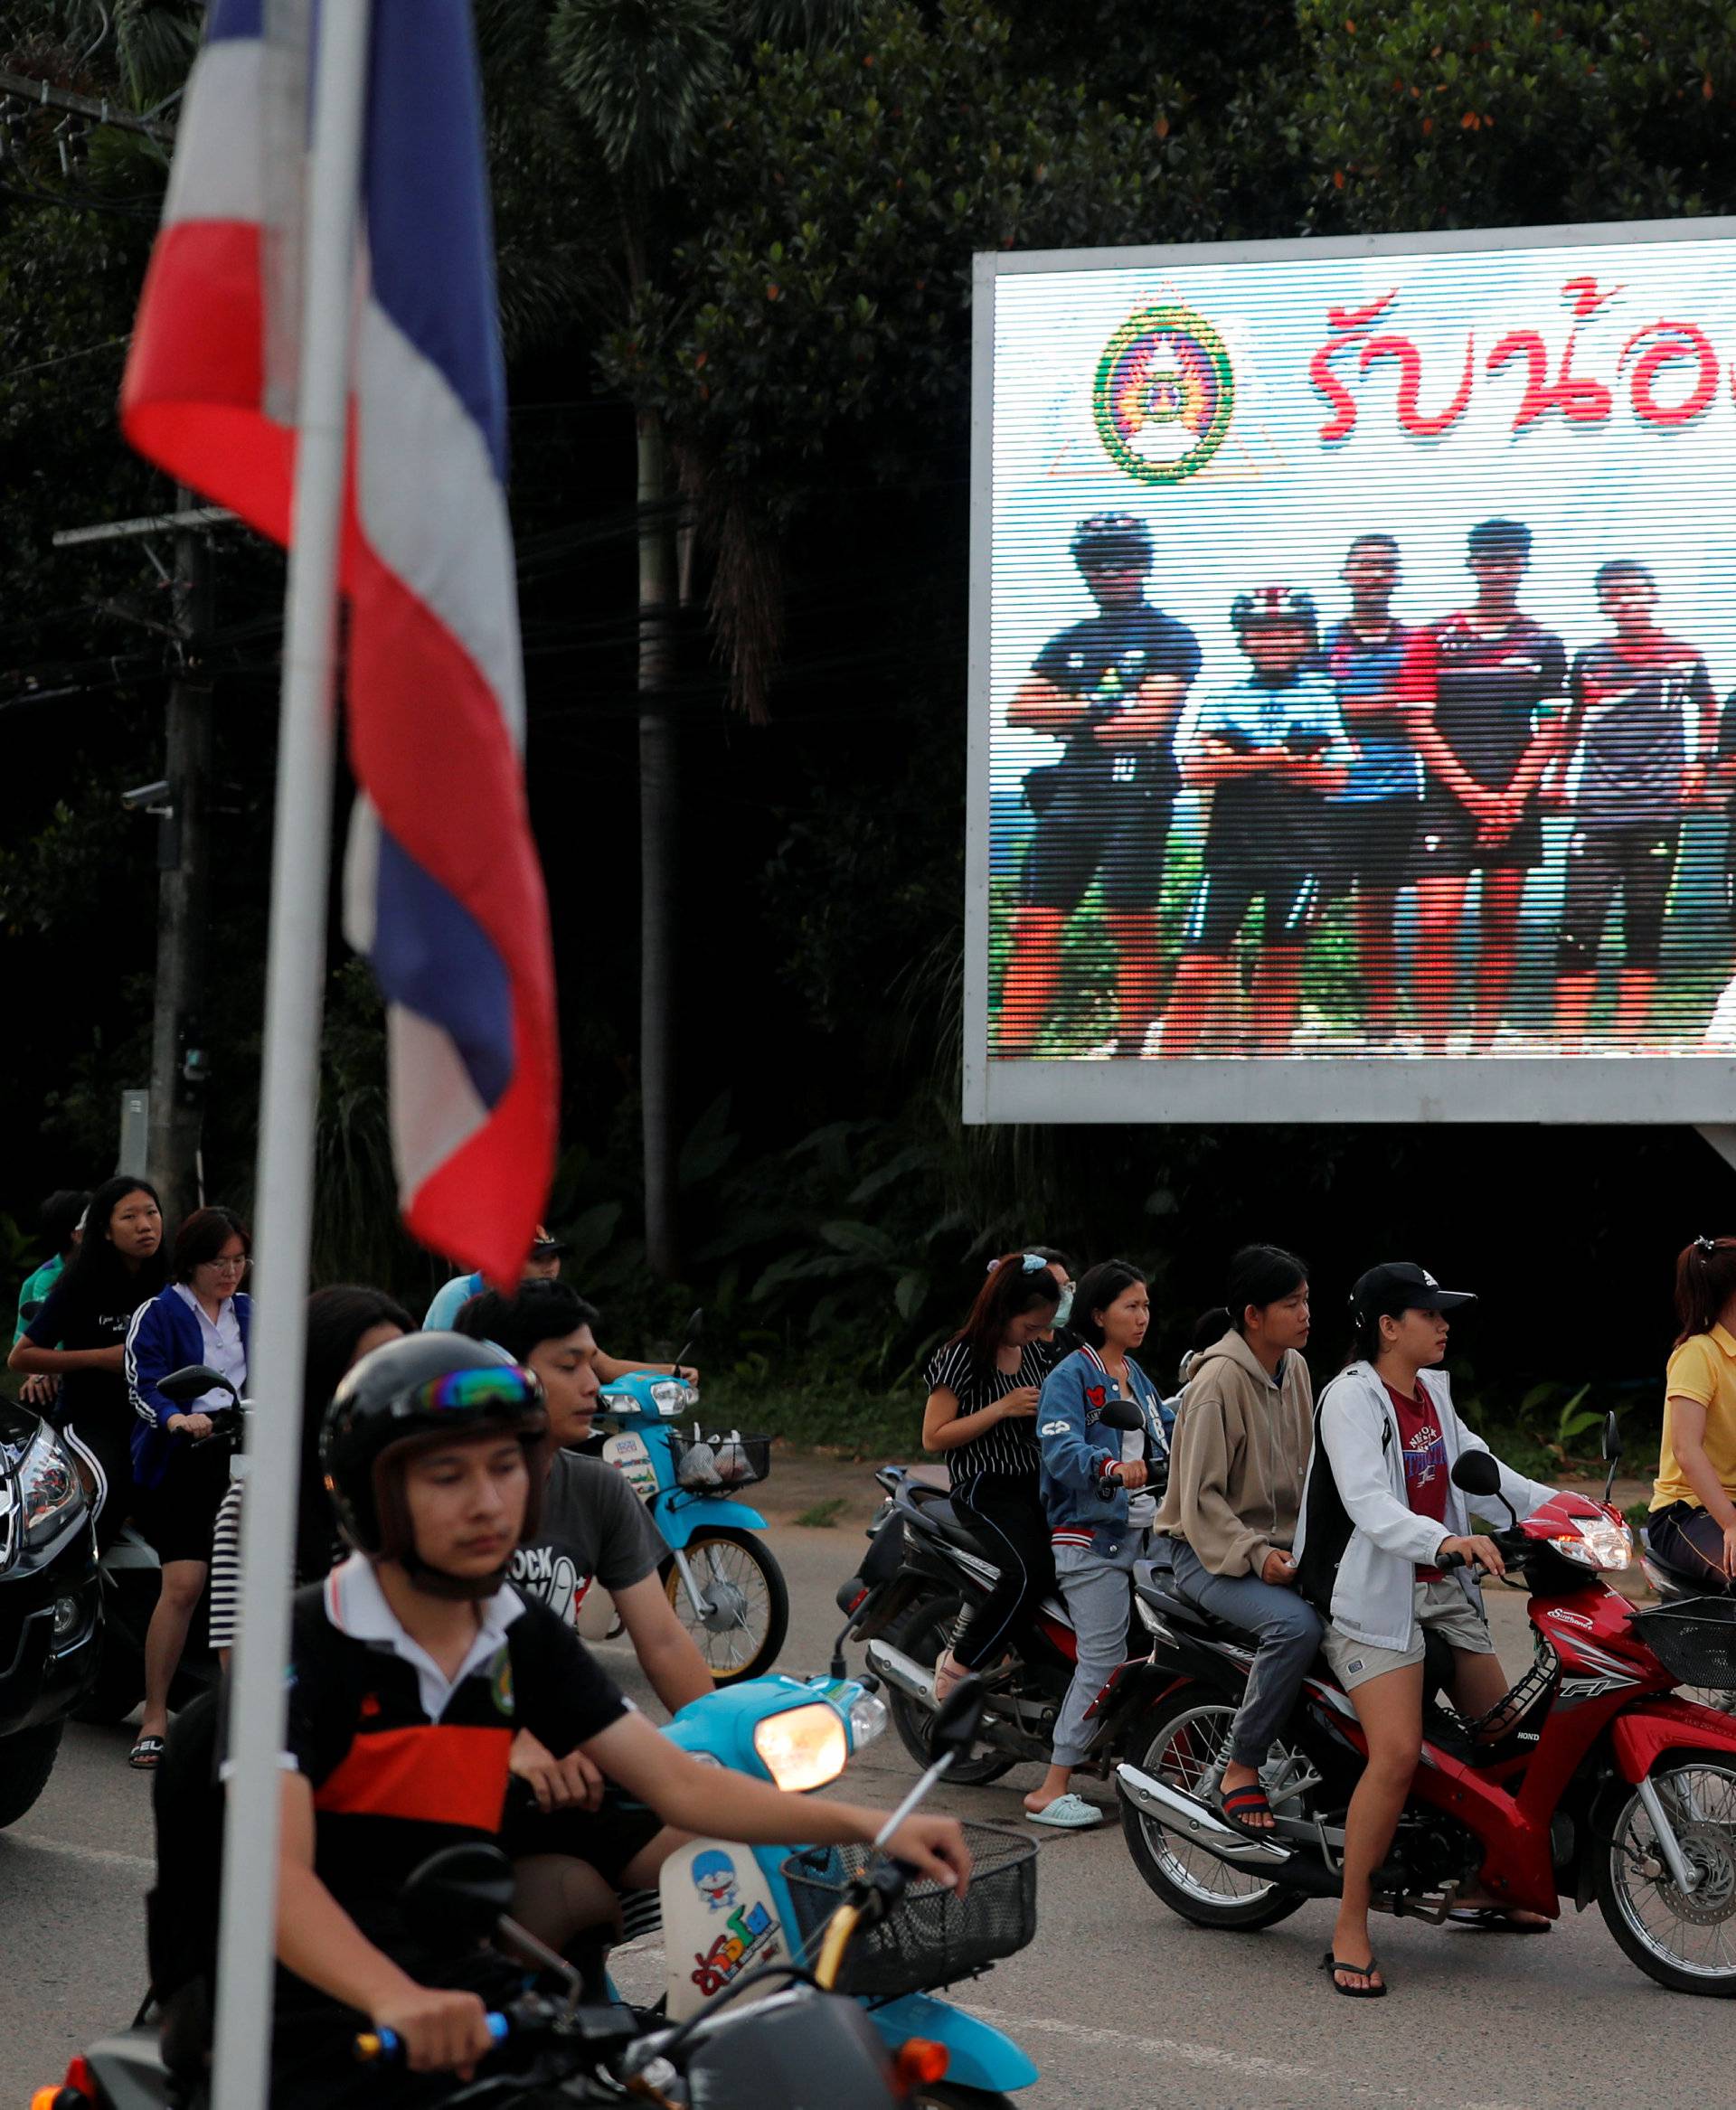 A board showing "Welcome home, boys", is seen after rescue effort has begun for the 12 schoolboys and their soccer coach trapped in Tham Luang cave, in Chiang Rai